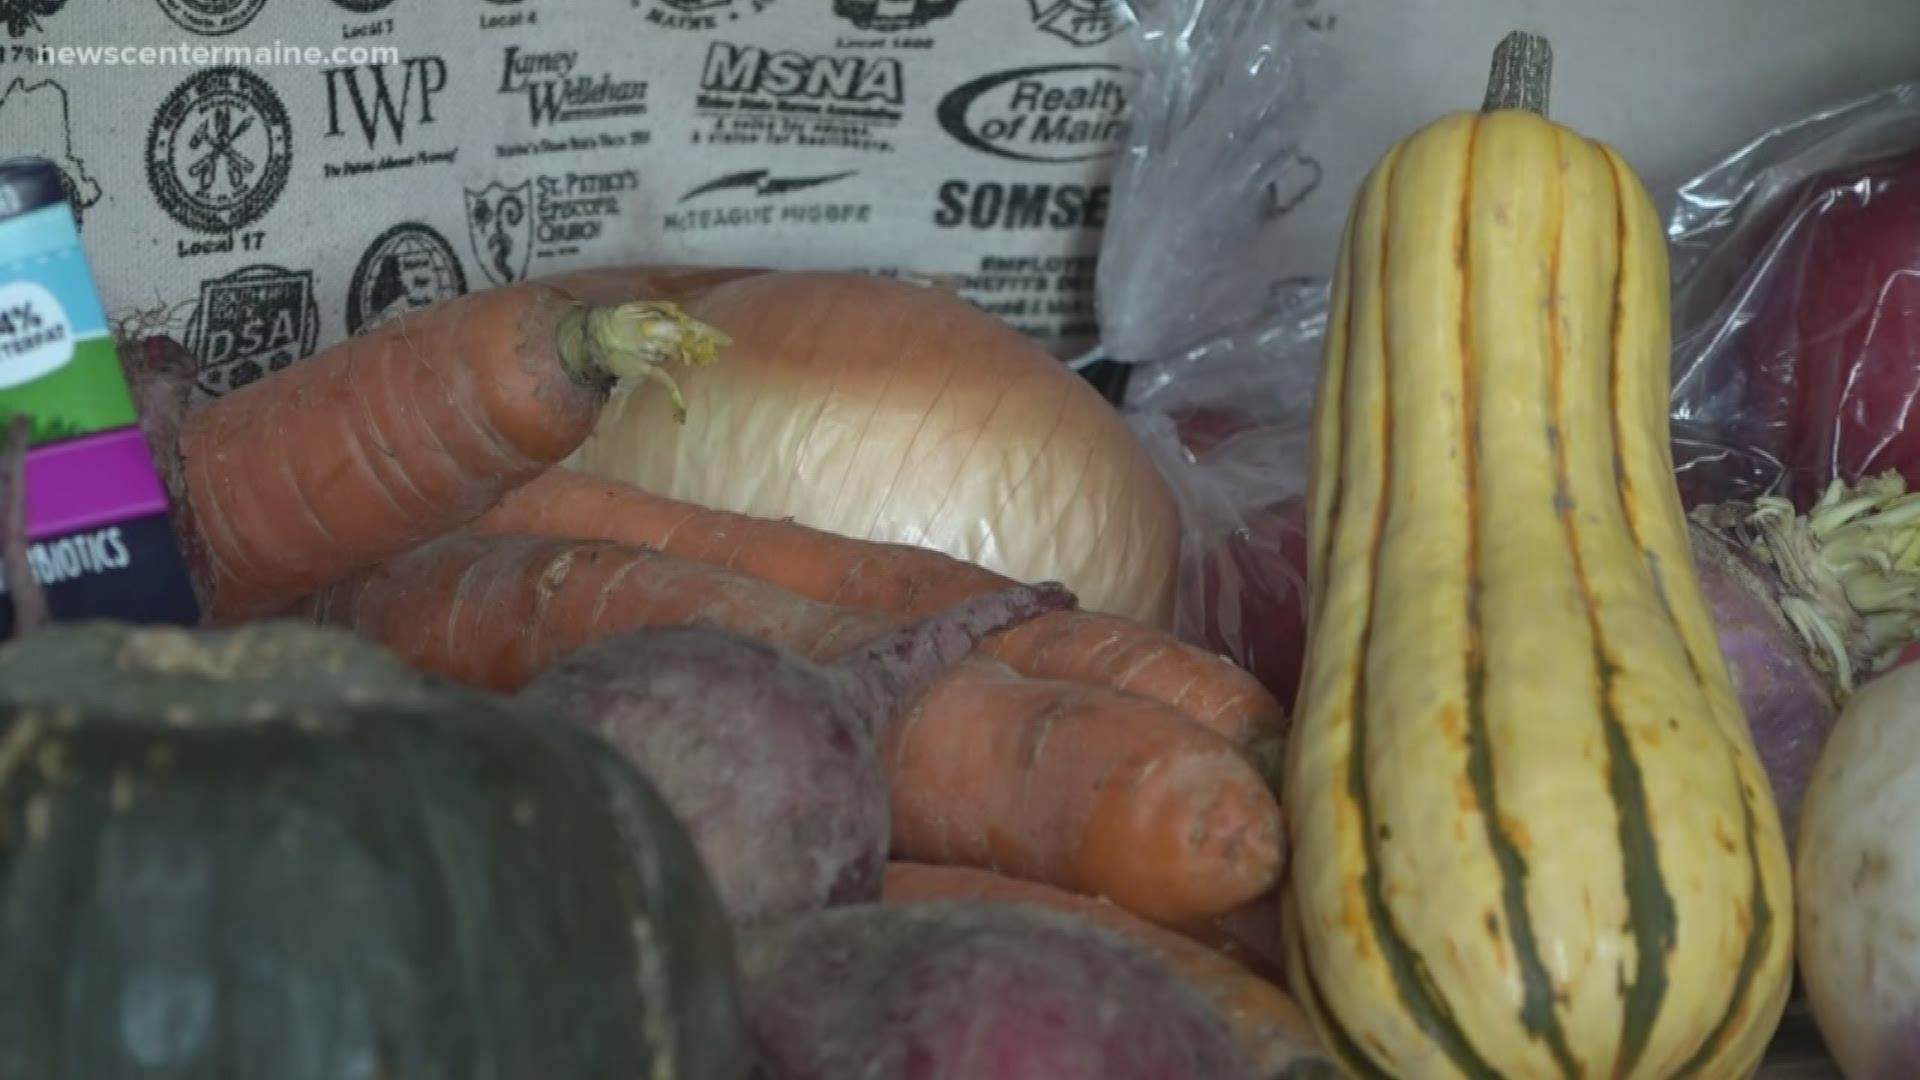 On Thanksgiving, the Brewer nonprofit will give away 1,300 food baskets to Mainers in need this holiday season.